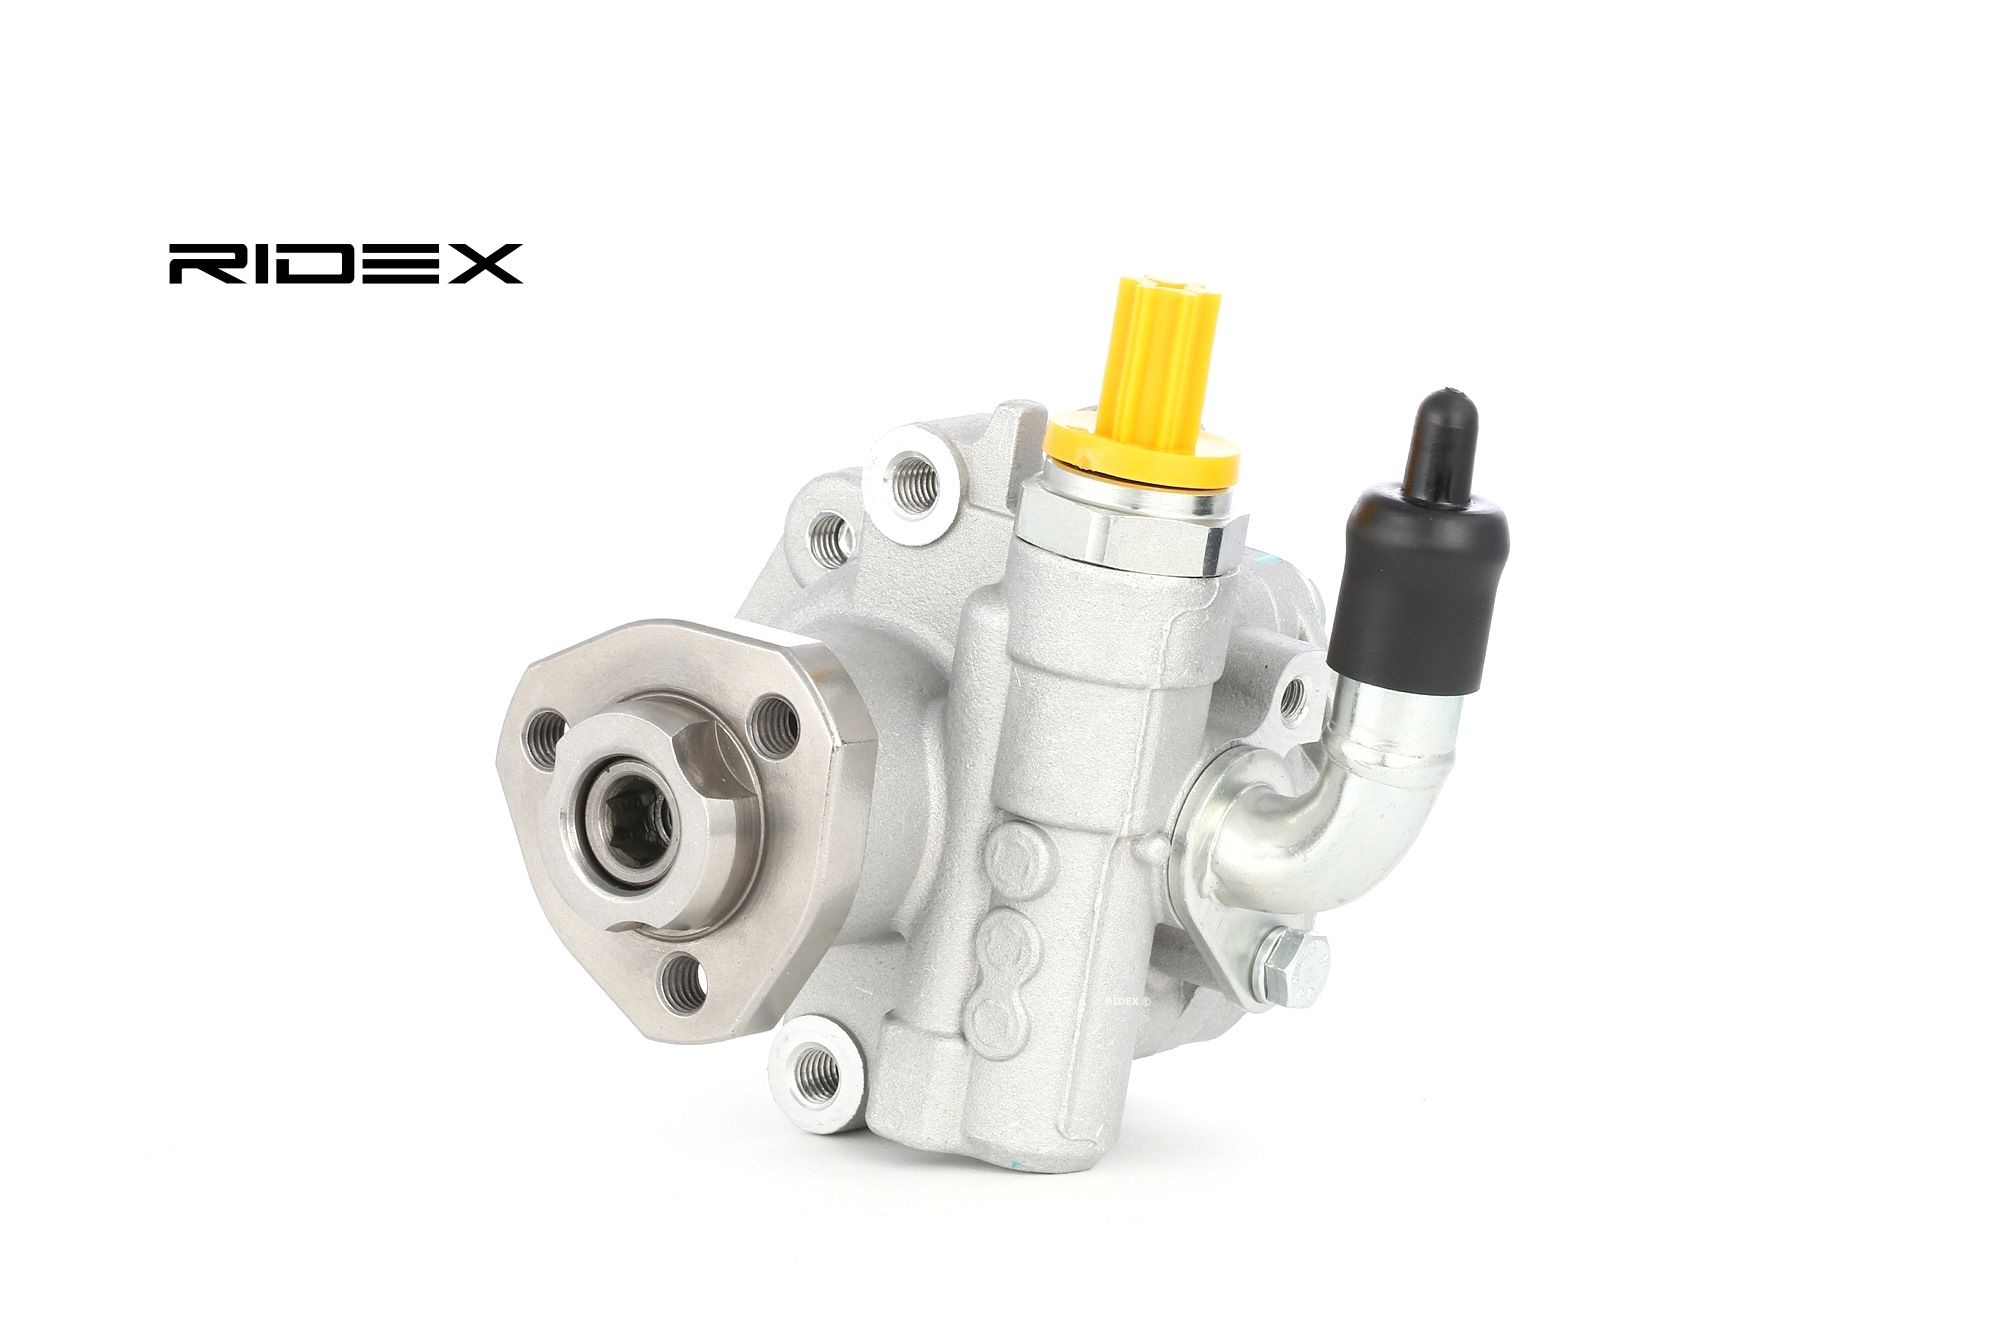 Image of RIDEX Power Steering Pump VW 12H0055 2E0422155A,2E0422155B,2E0422155C Steering Pump,EHPS,EHPS Pump,Hydraulic Pump, steering system 7E0422154